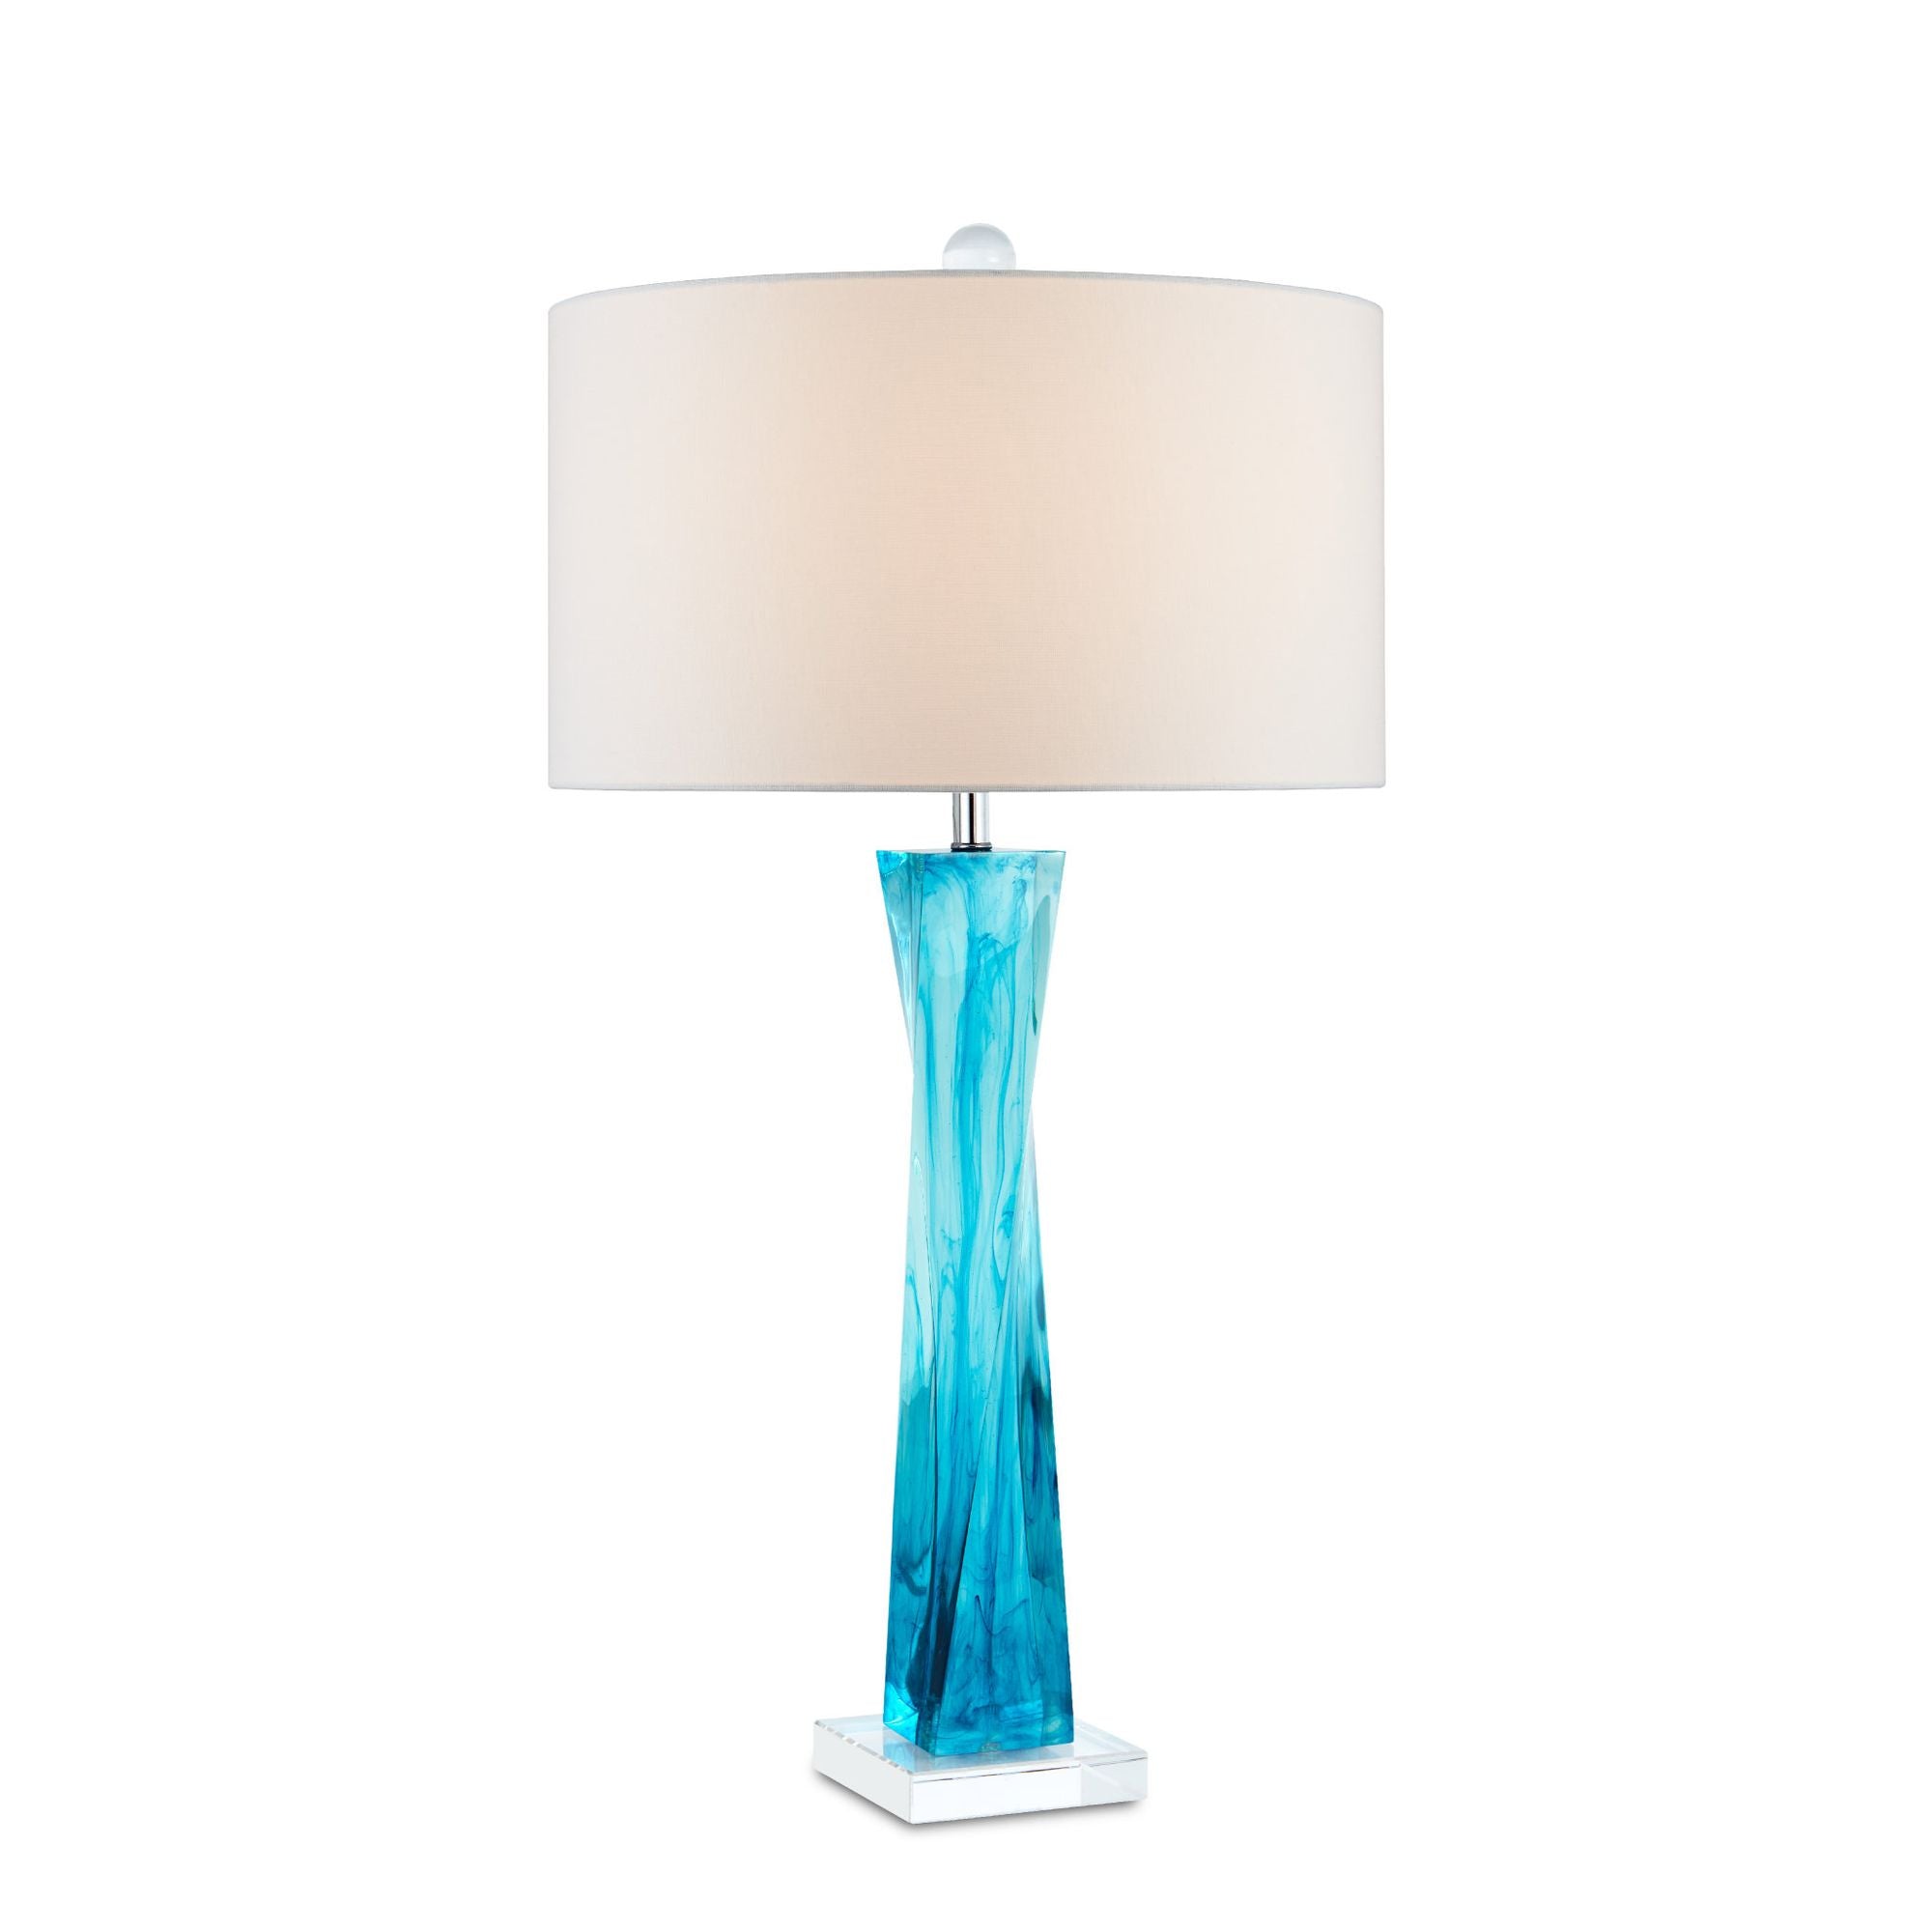 Chatto Blue Table Lamp - Transparent Blue